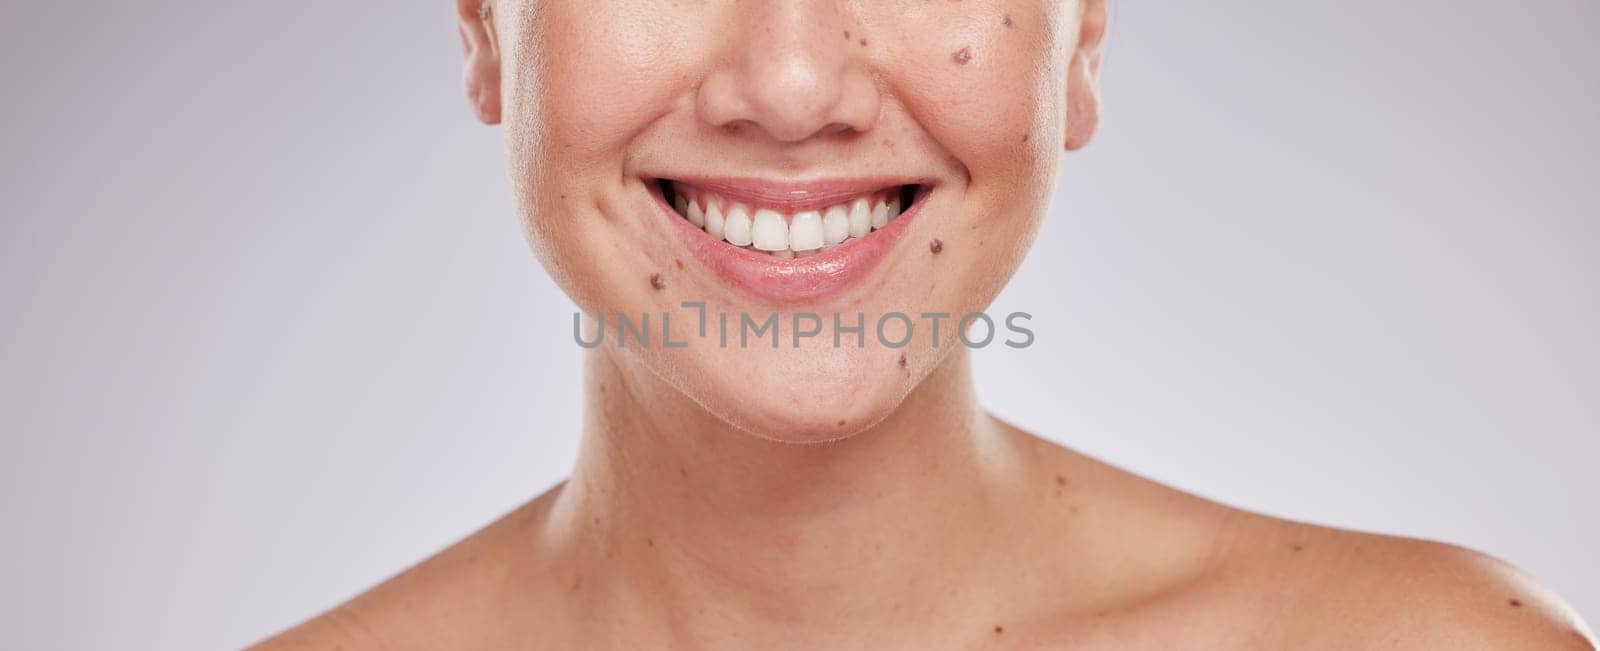 Face smile, dental and teeth of woman in studio isolated on a gray background. Skincare makeup, cosmetics and lips, mouth and oral hygiene of happy female model with veneers, invisalign and wellness